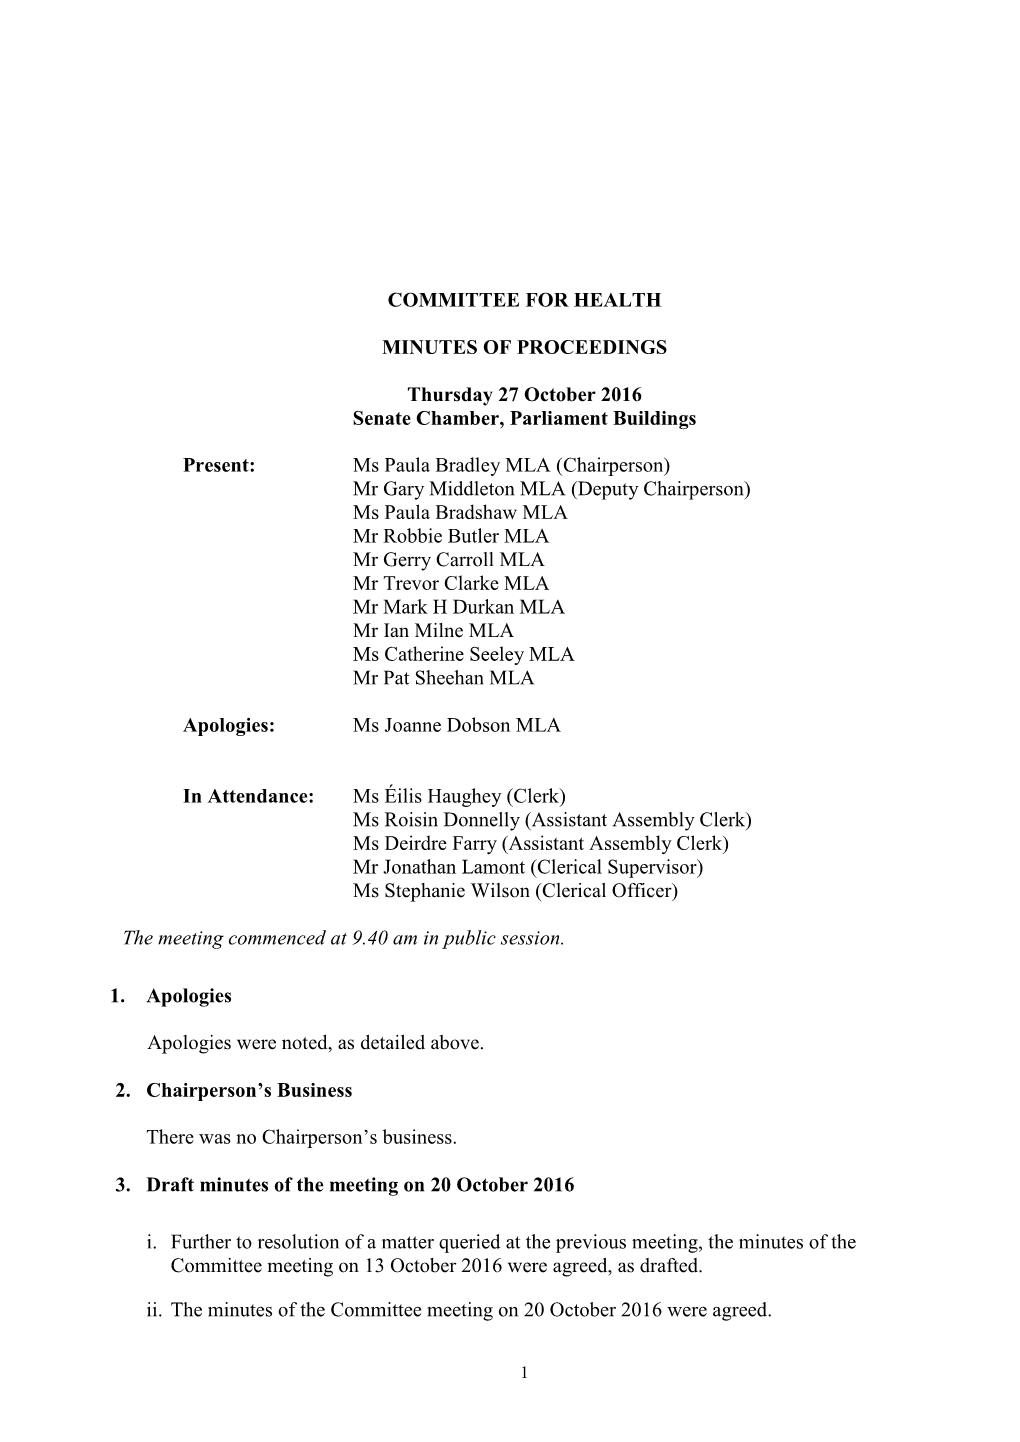 Committee for Health Minutes